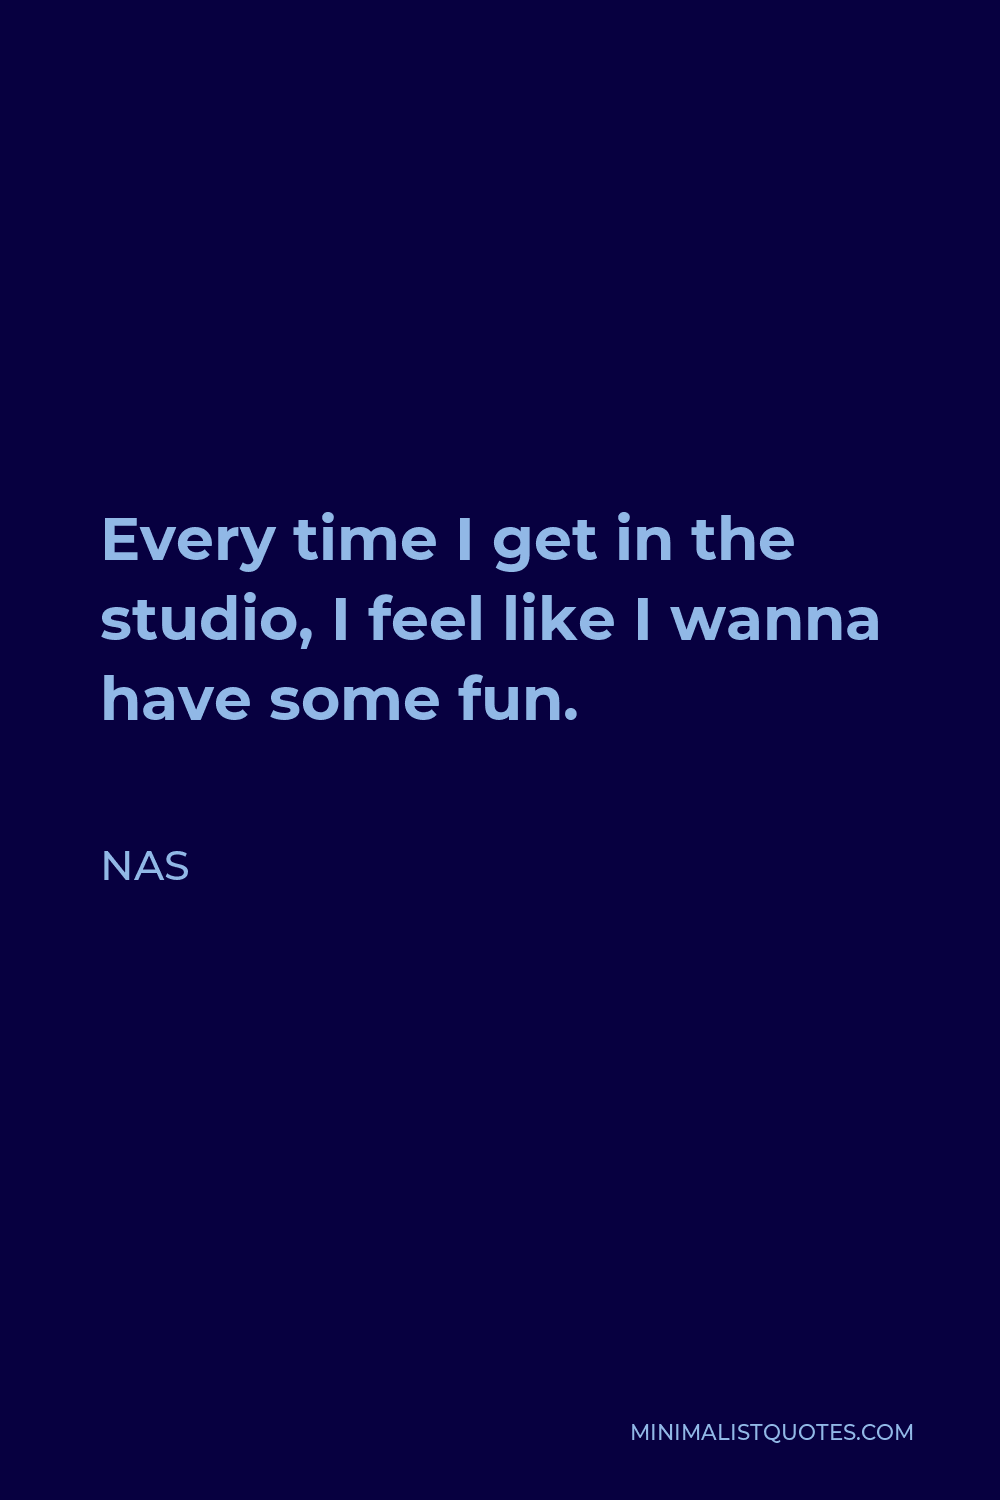 Nas Quote - Every time I get in the studio, I feel like I wanna have some fun.